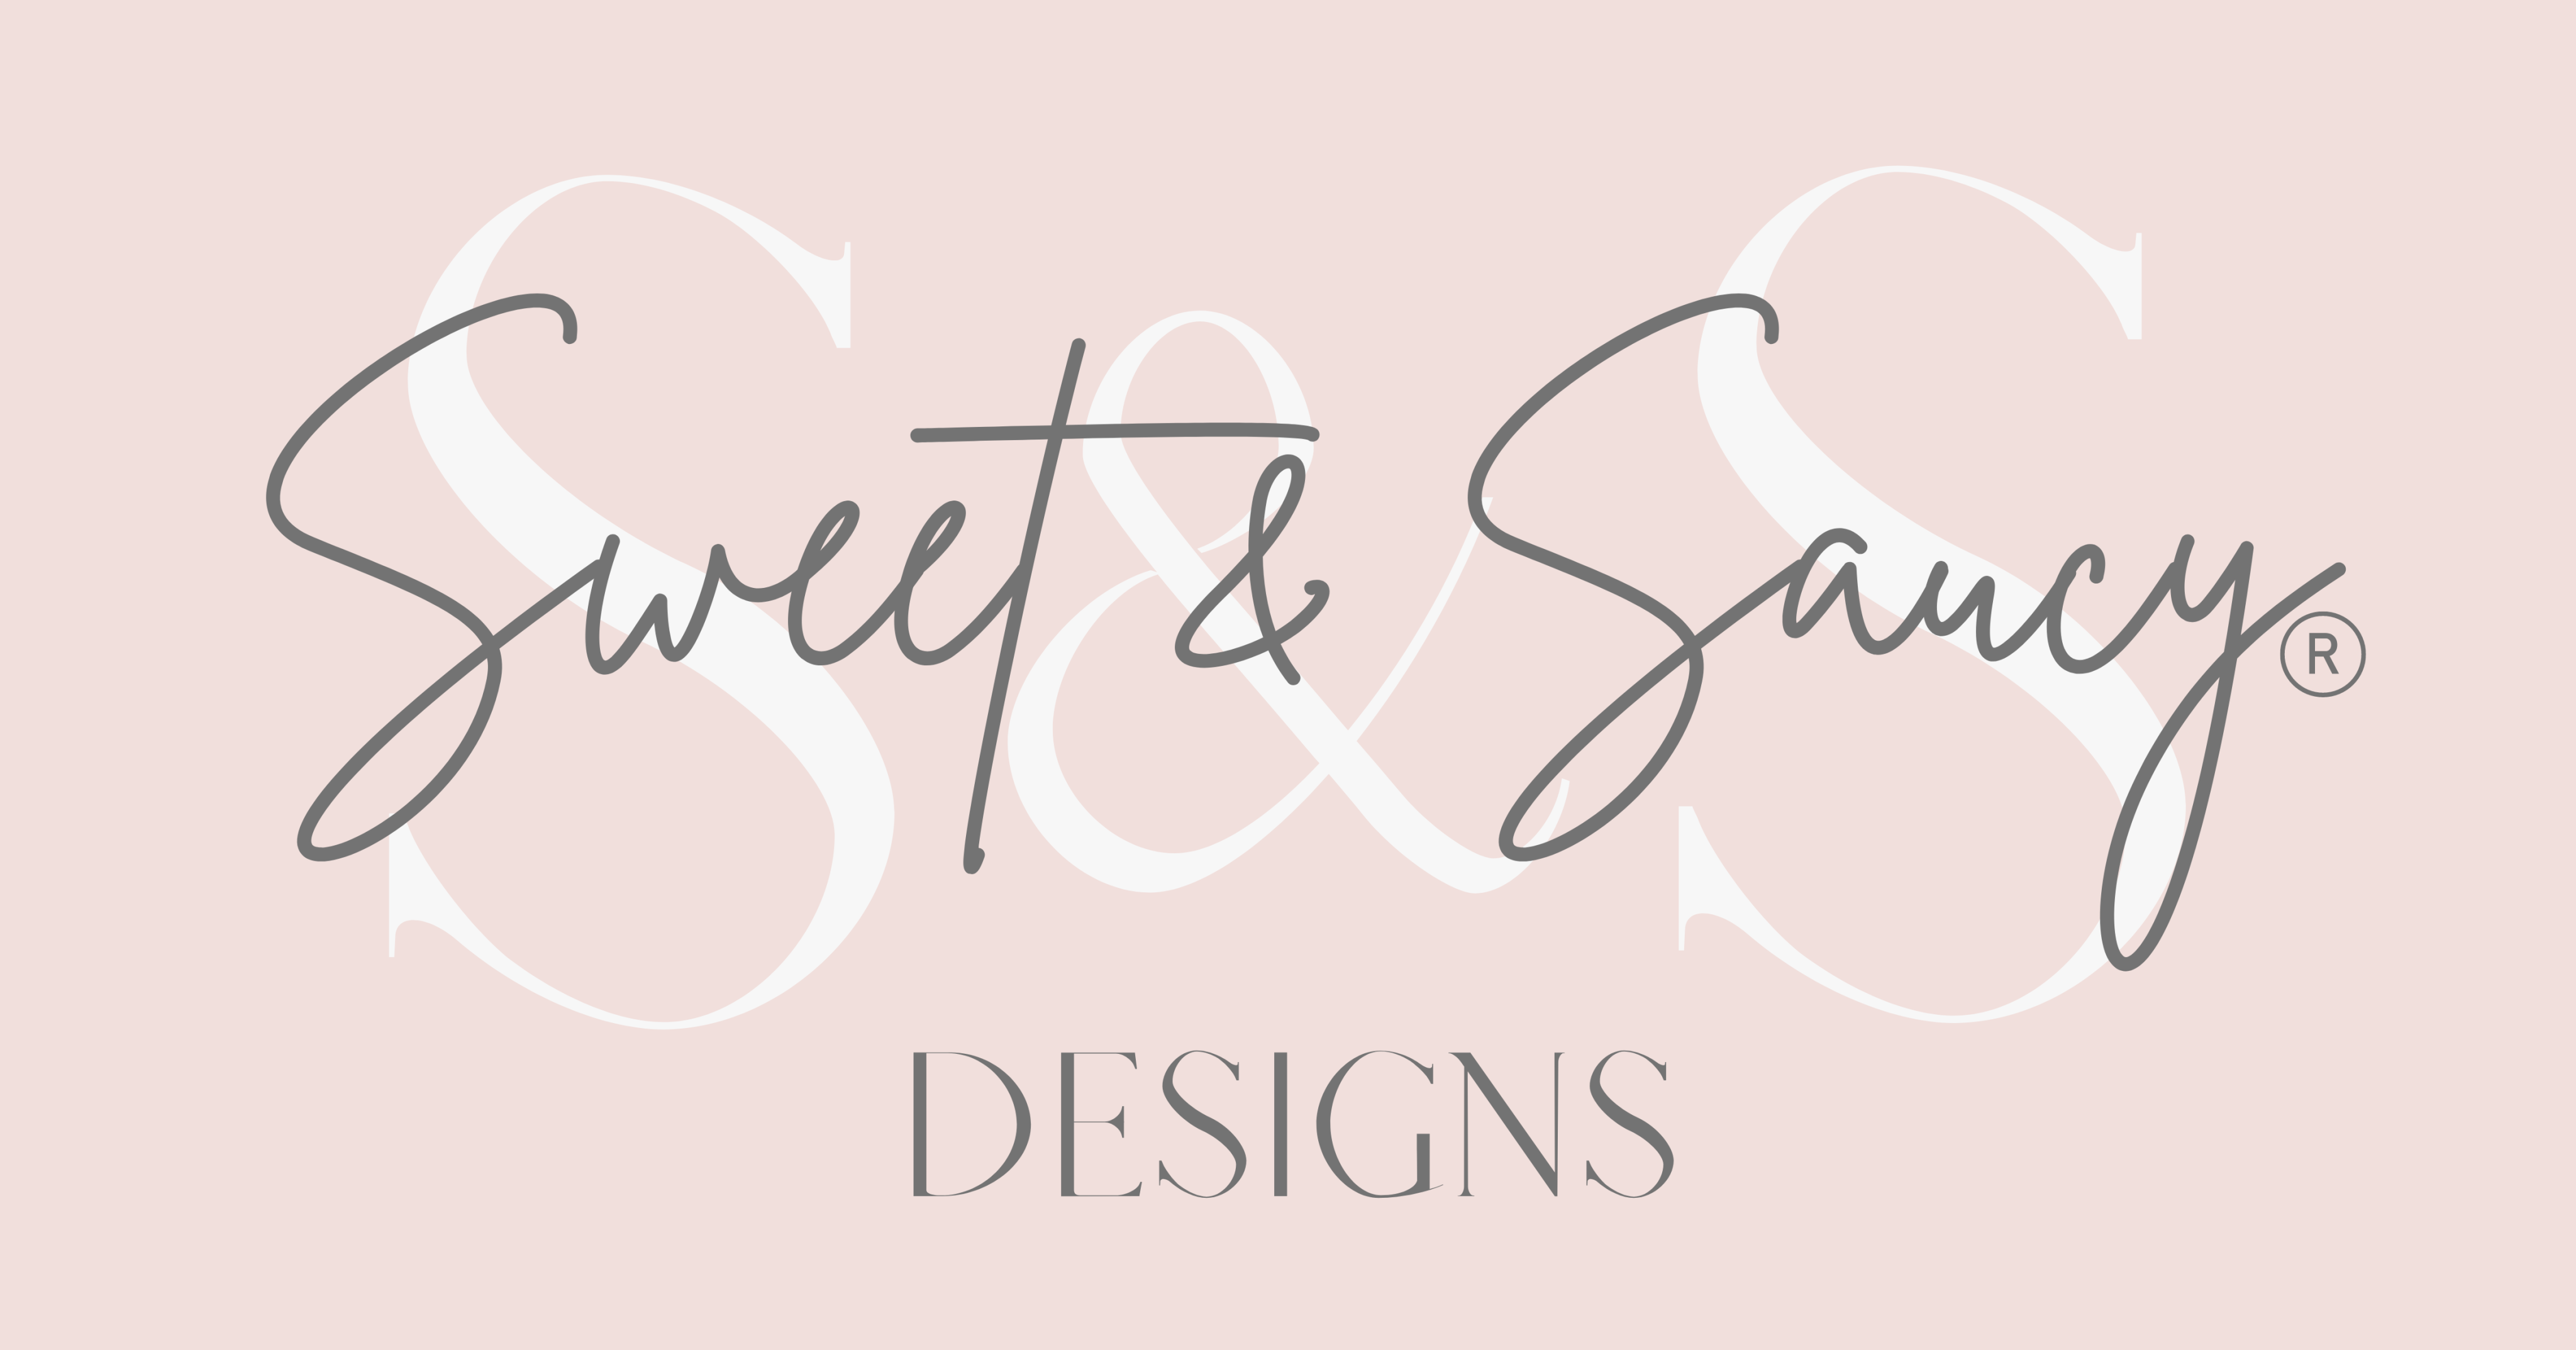 https://shopsweetandsaucy.com/wp-content/uploads/2023/03/cropped-Sweet-Saucy-Designs-Logo.png